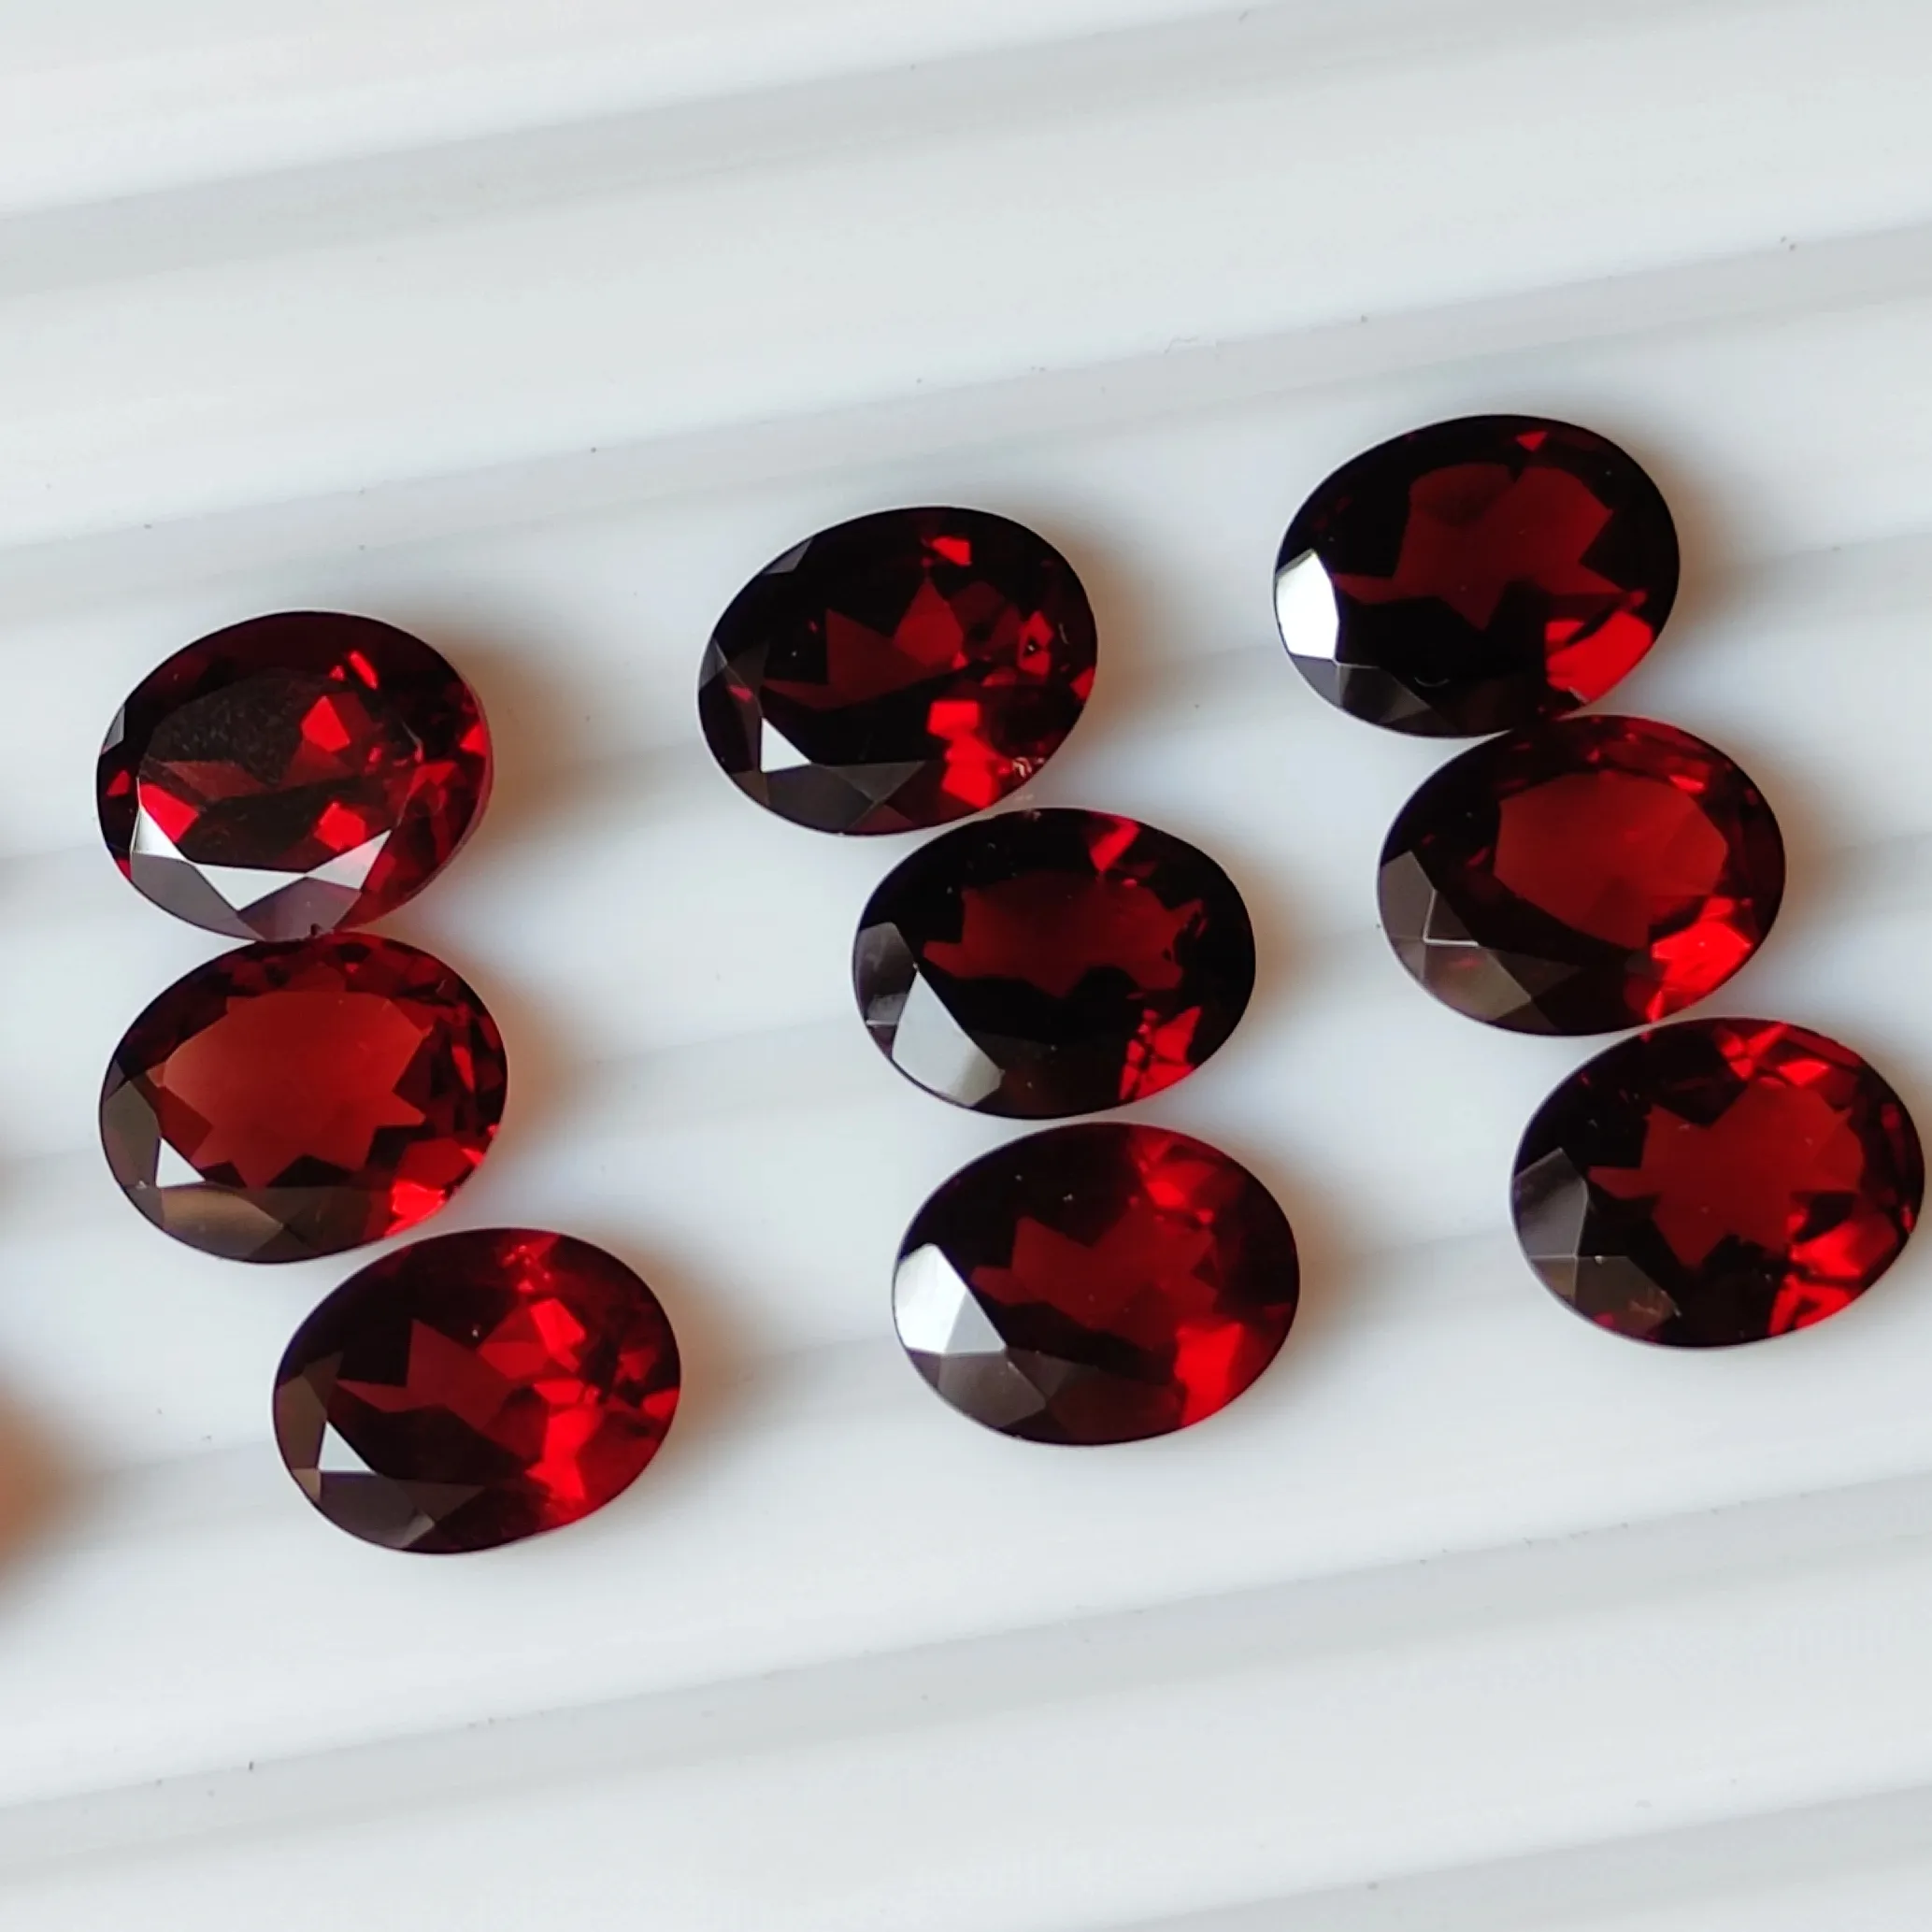 High Quality Red Mozambique Garrnet Cut Stones From 2mm To 12mm In Every Shape and Size Oval Round Pear Faceted Garnet Gems